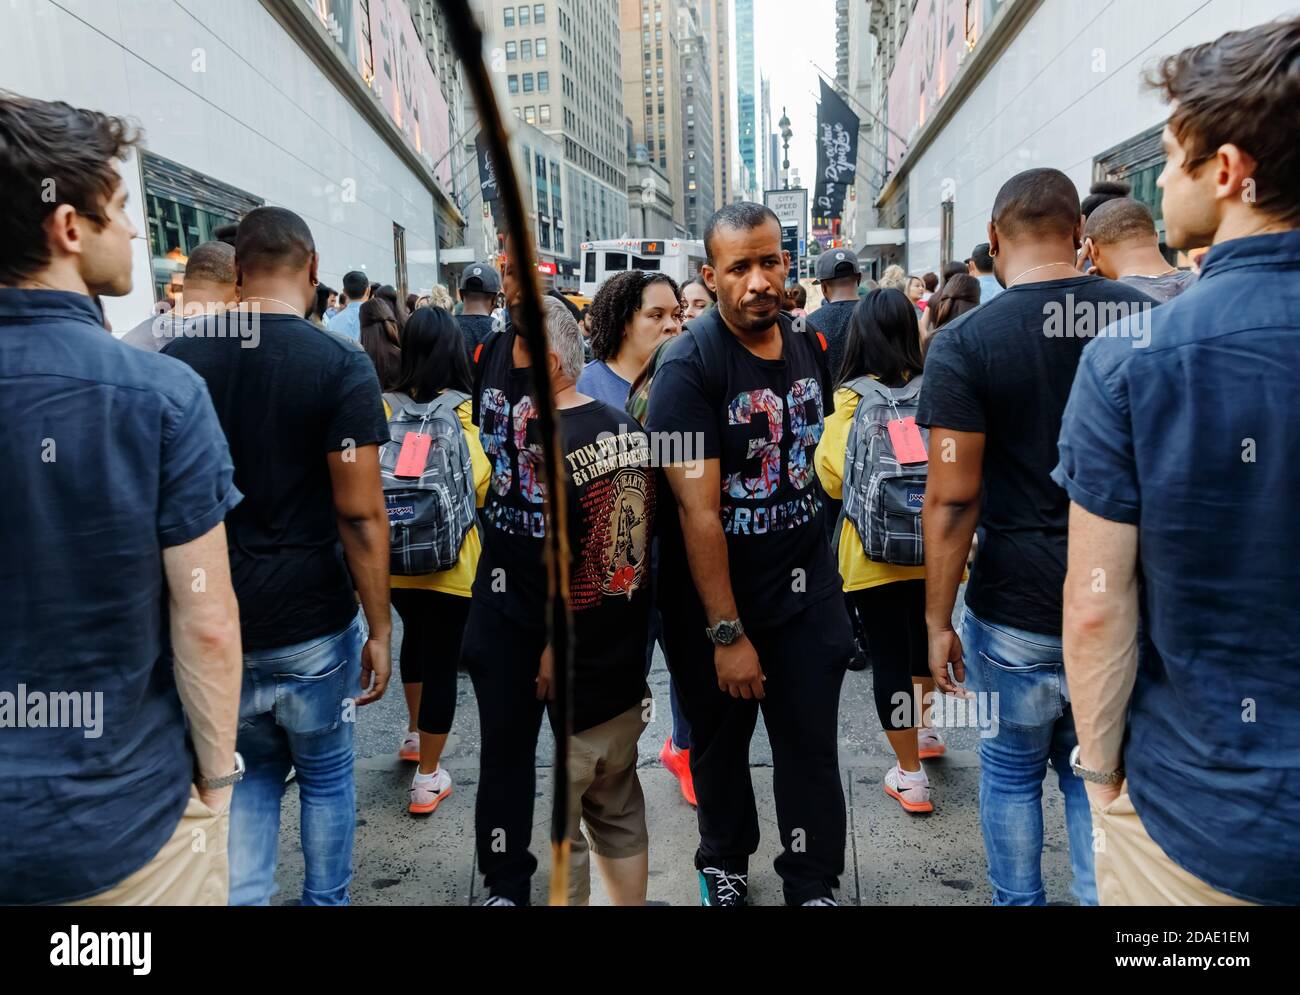 NEW YORK, USA - Sep 17, 2017: Manhattan street scene. Americans on the streets of New York City. Crowds of people near the Victoria's secret shop on S Stock Photo